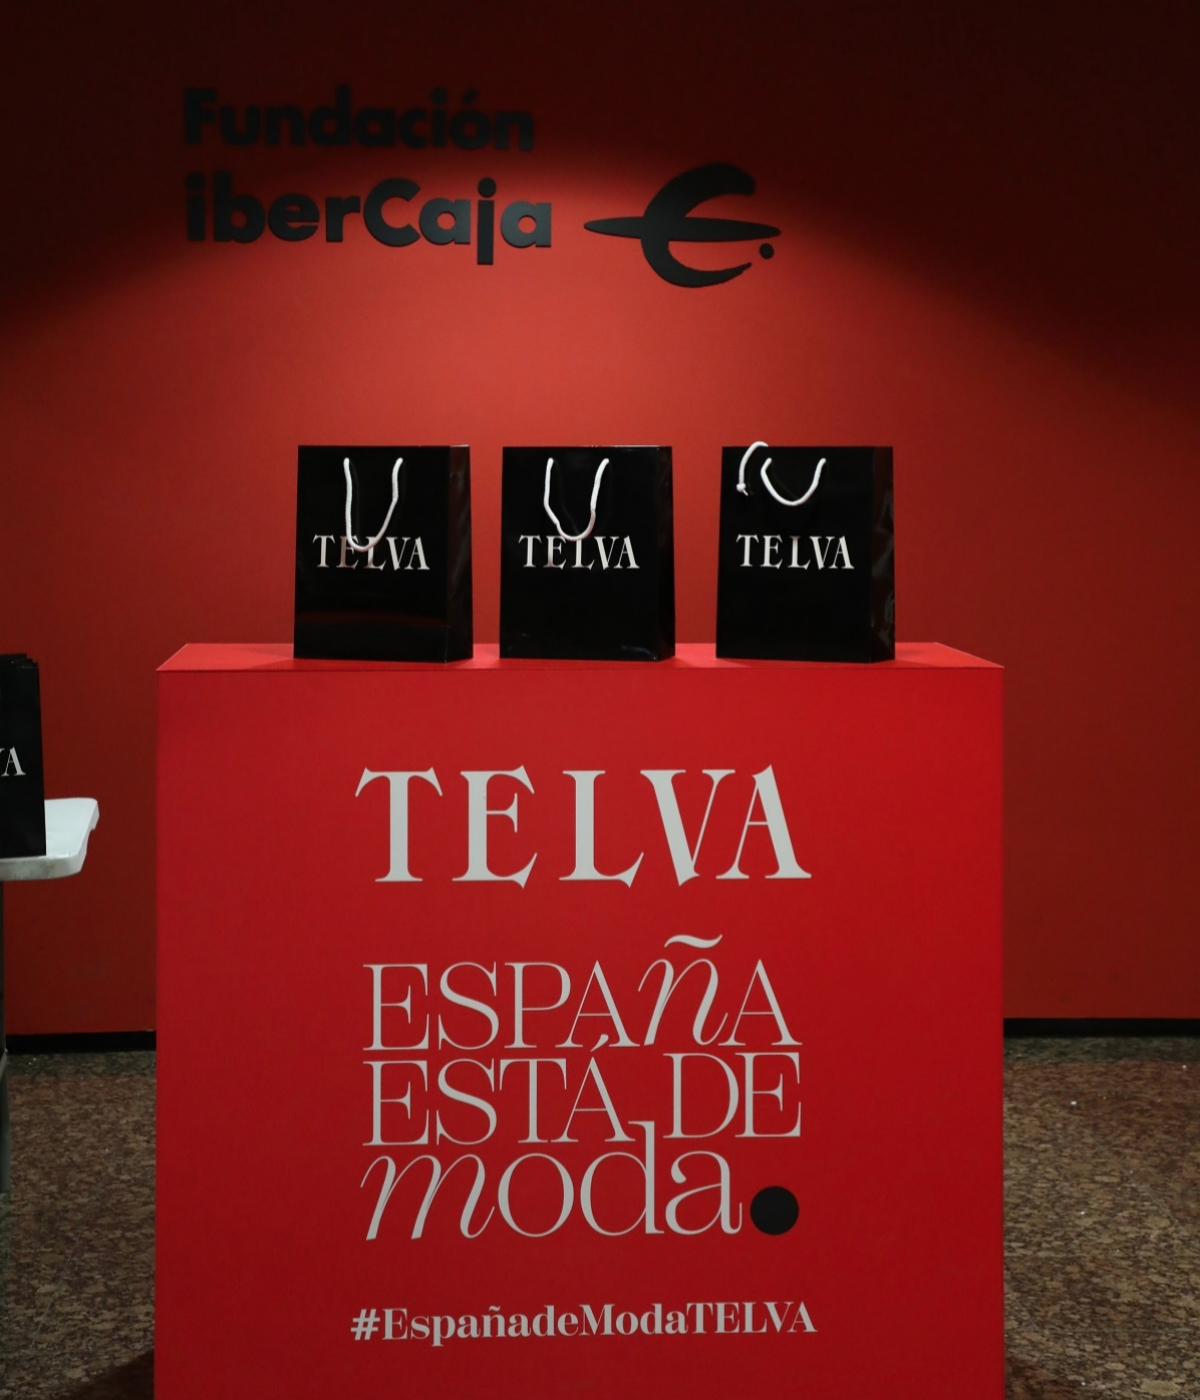 At the exit of the Aragn Room of the Ibercaja Building where the two beauty workshops were held, the assistants took a gift from TELVA.